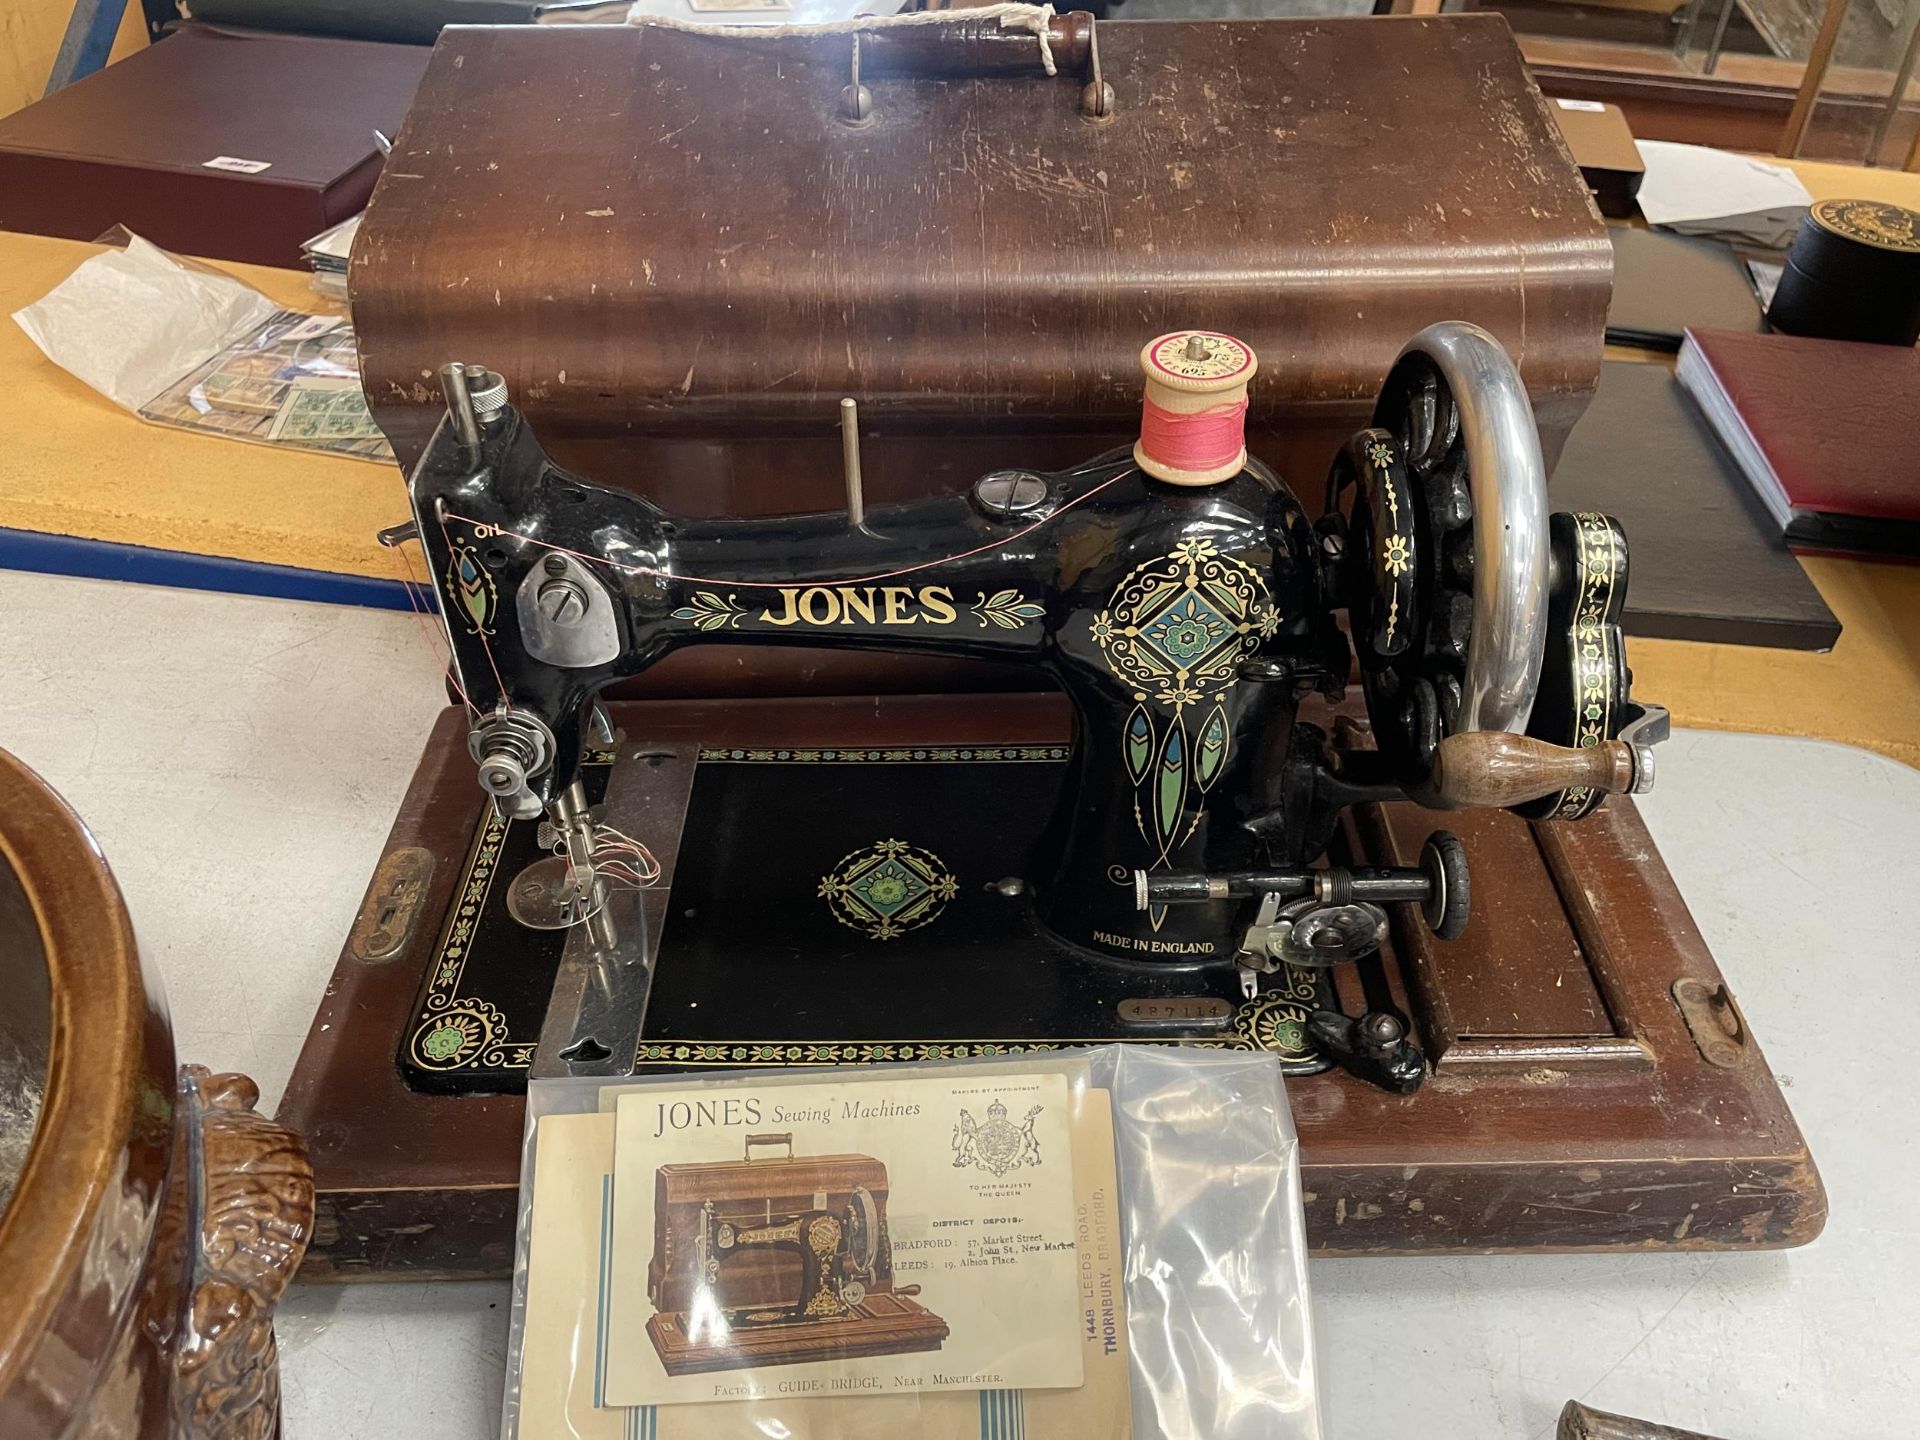 A VINTAGE CASED JONES SEWING MACHINE WITH ORIGINAL BOOKLET